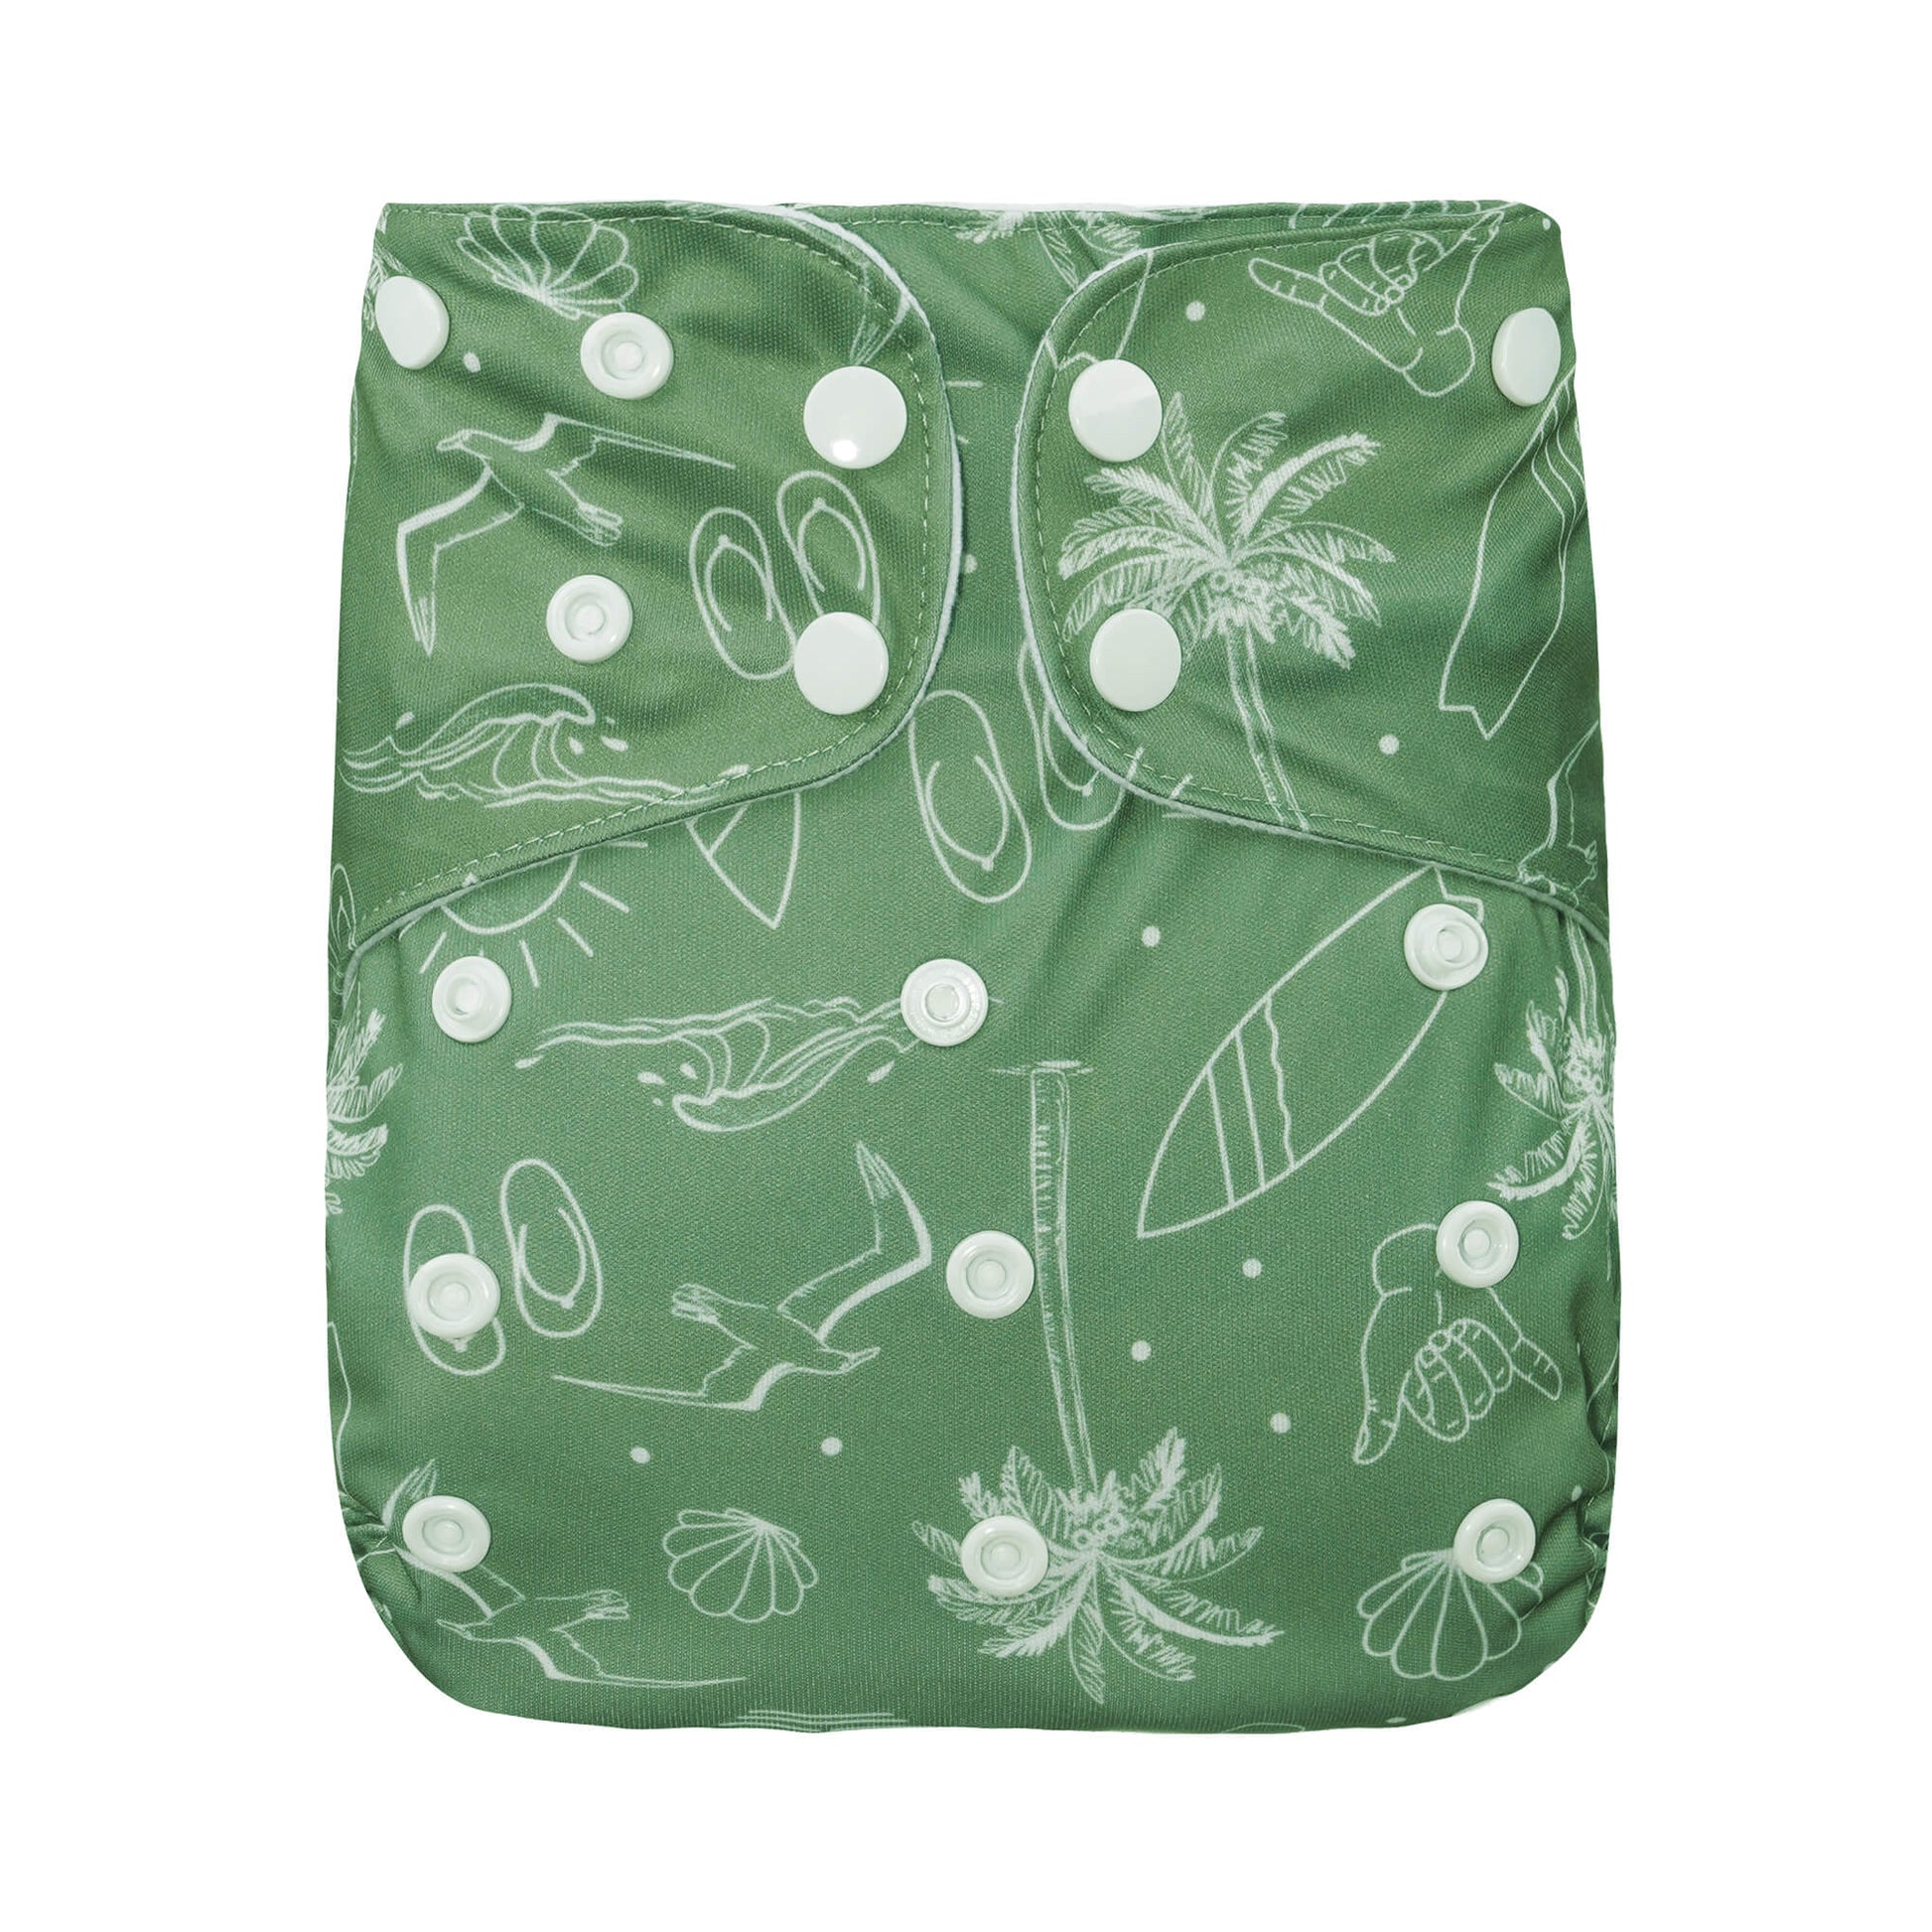 Large Reusable Cloth Nappy by Bear & Moo in Island Vibes print